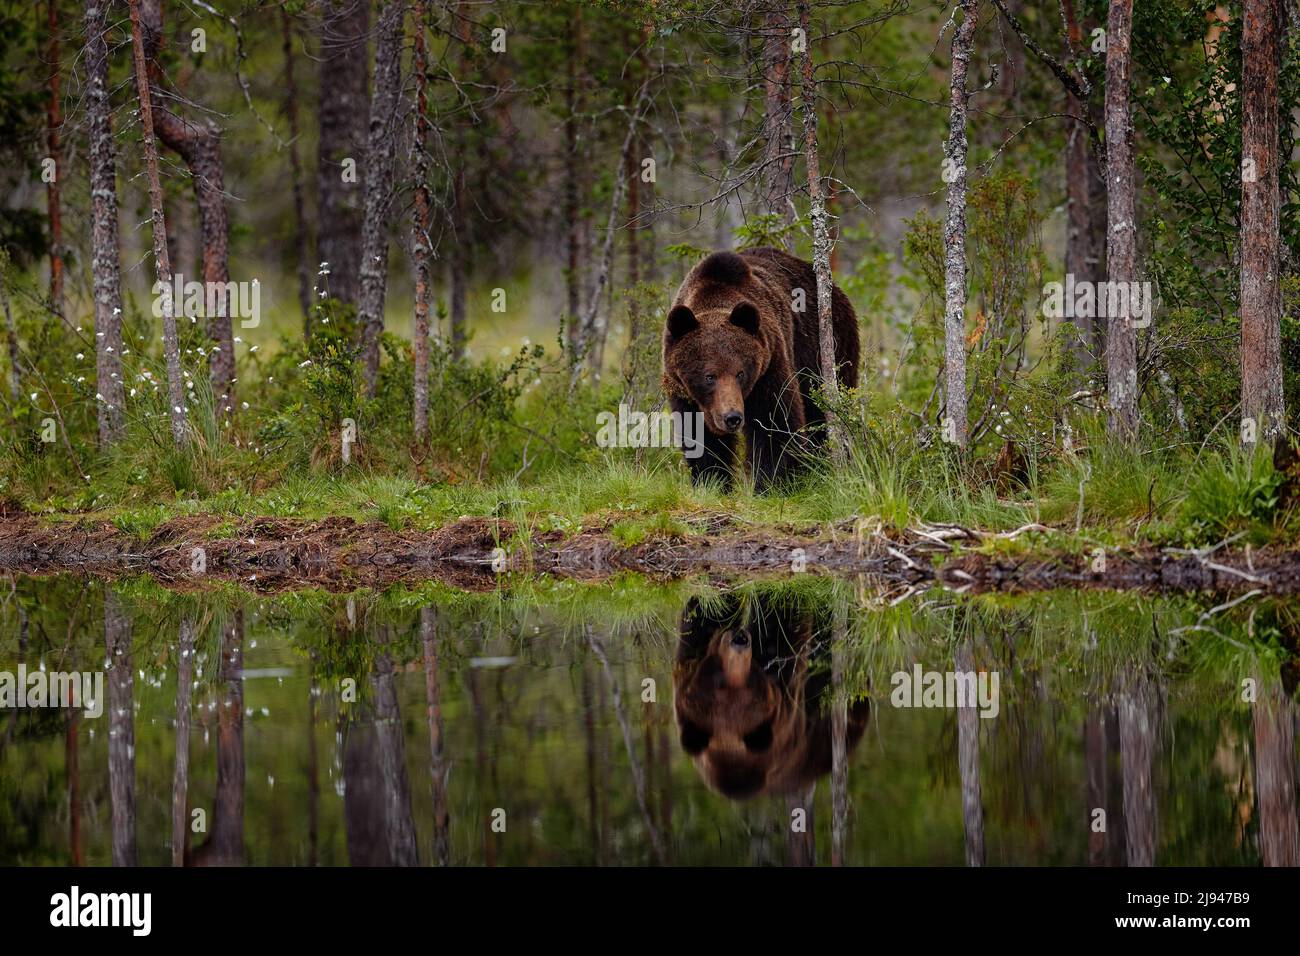 Summer wildlife. Bear standing,  sit up on its hind legs, somerr forest with cotton grass.  Dangerous animal in nature forest and meadow habitat. Wild Stock Photo